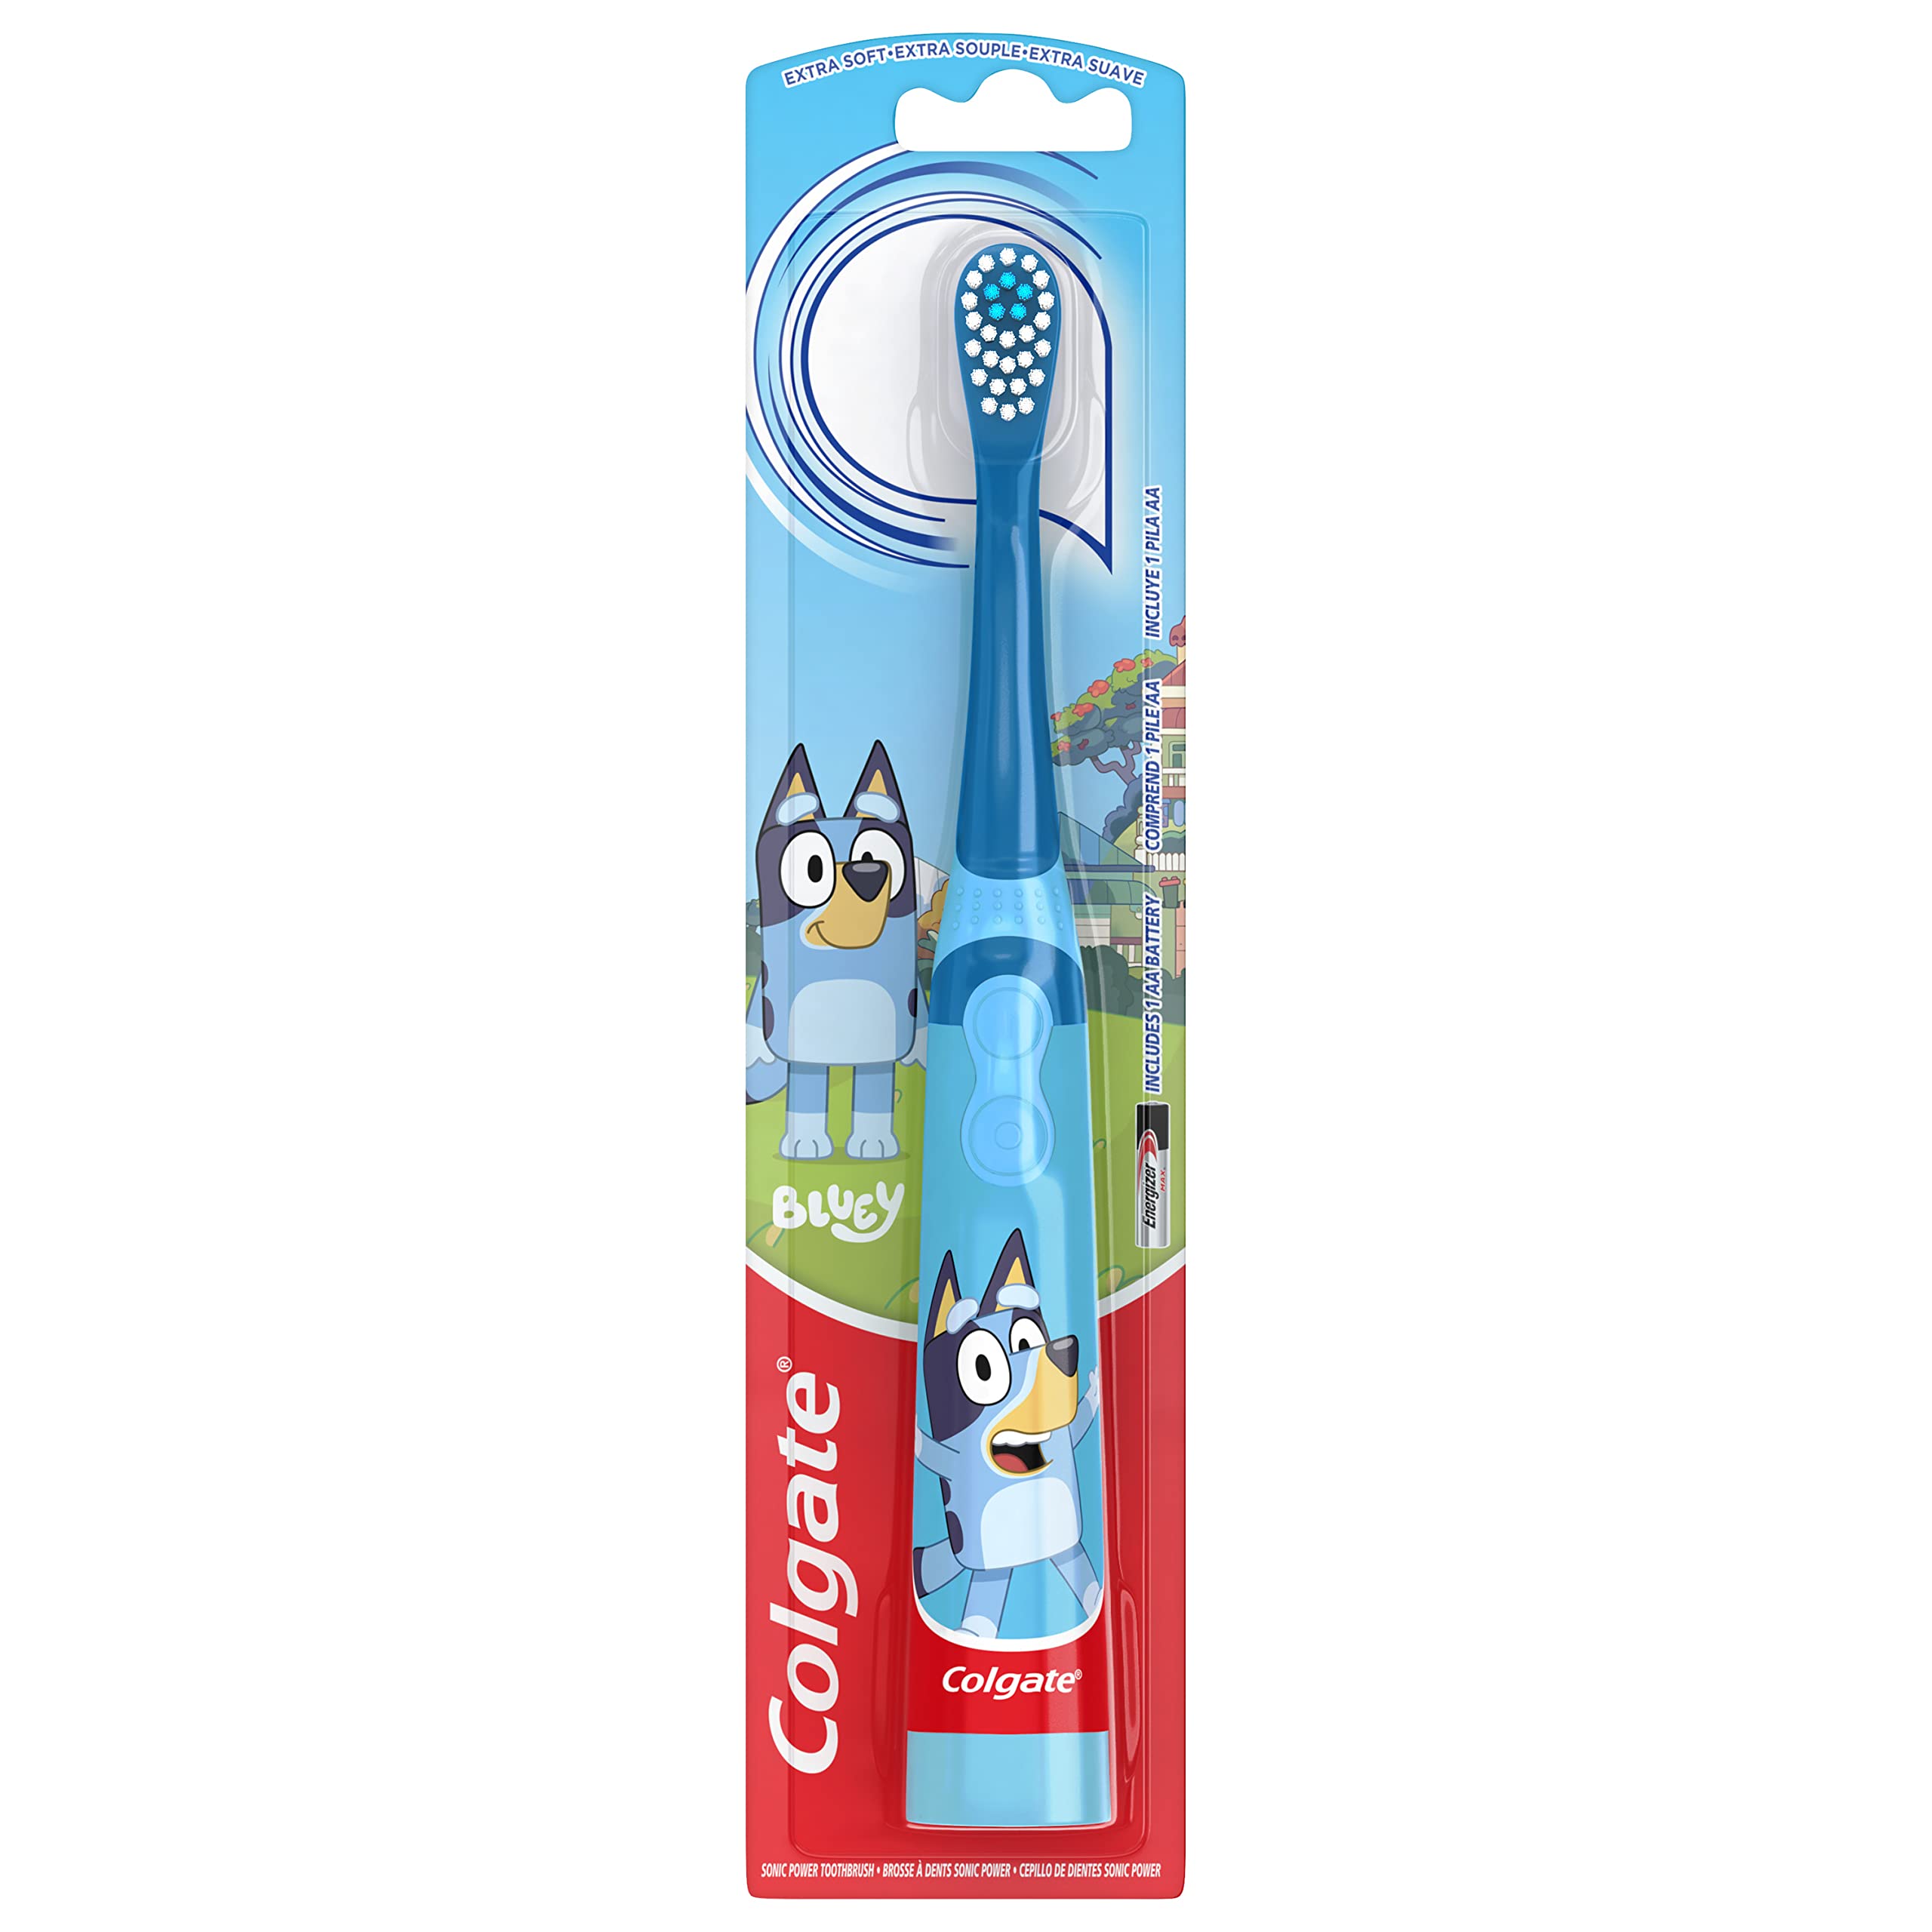 Colgate Kids Battery Powered Toothbrush (Bluey) $2.75 w/ S&S + Free Shipping w/ Prime or on $35+